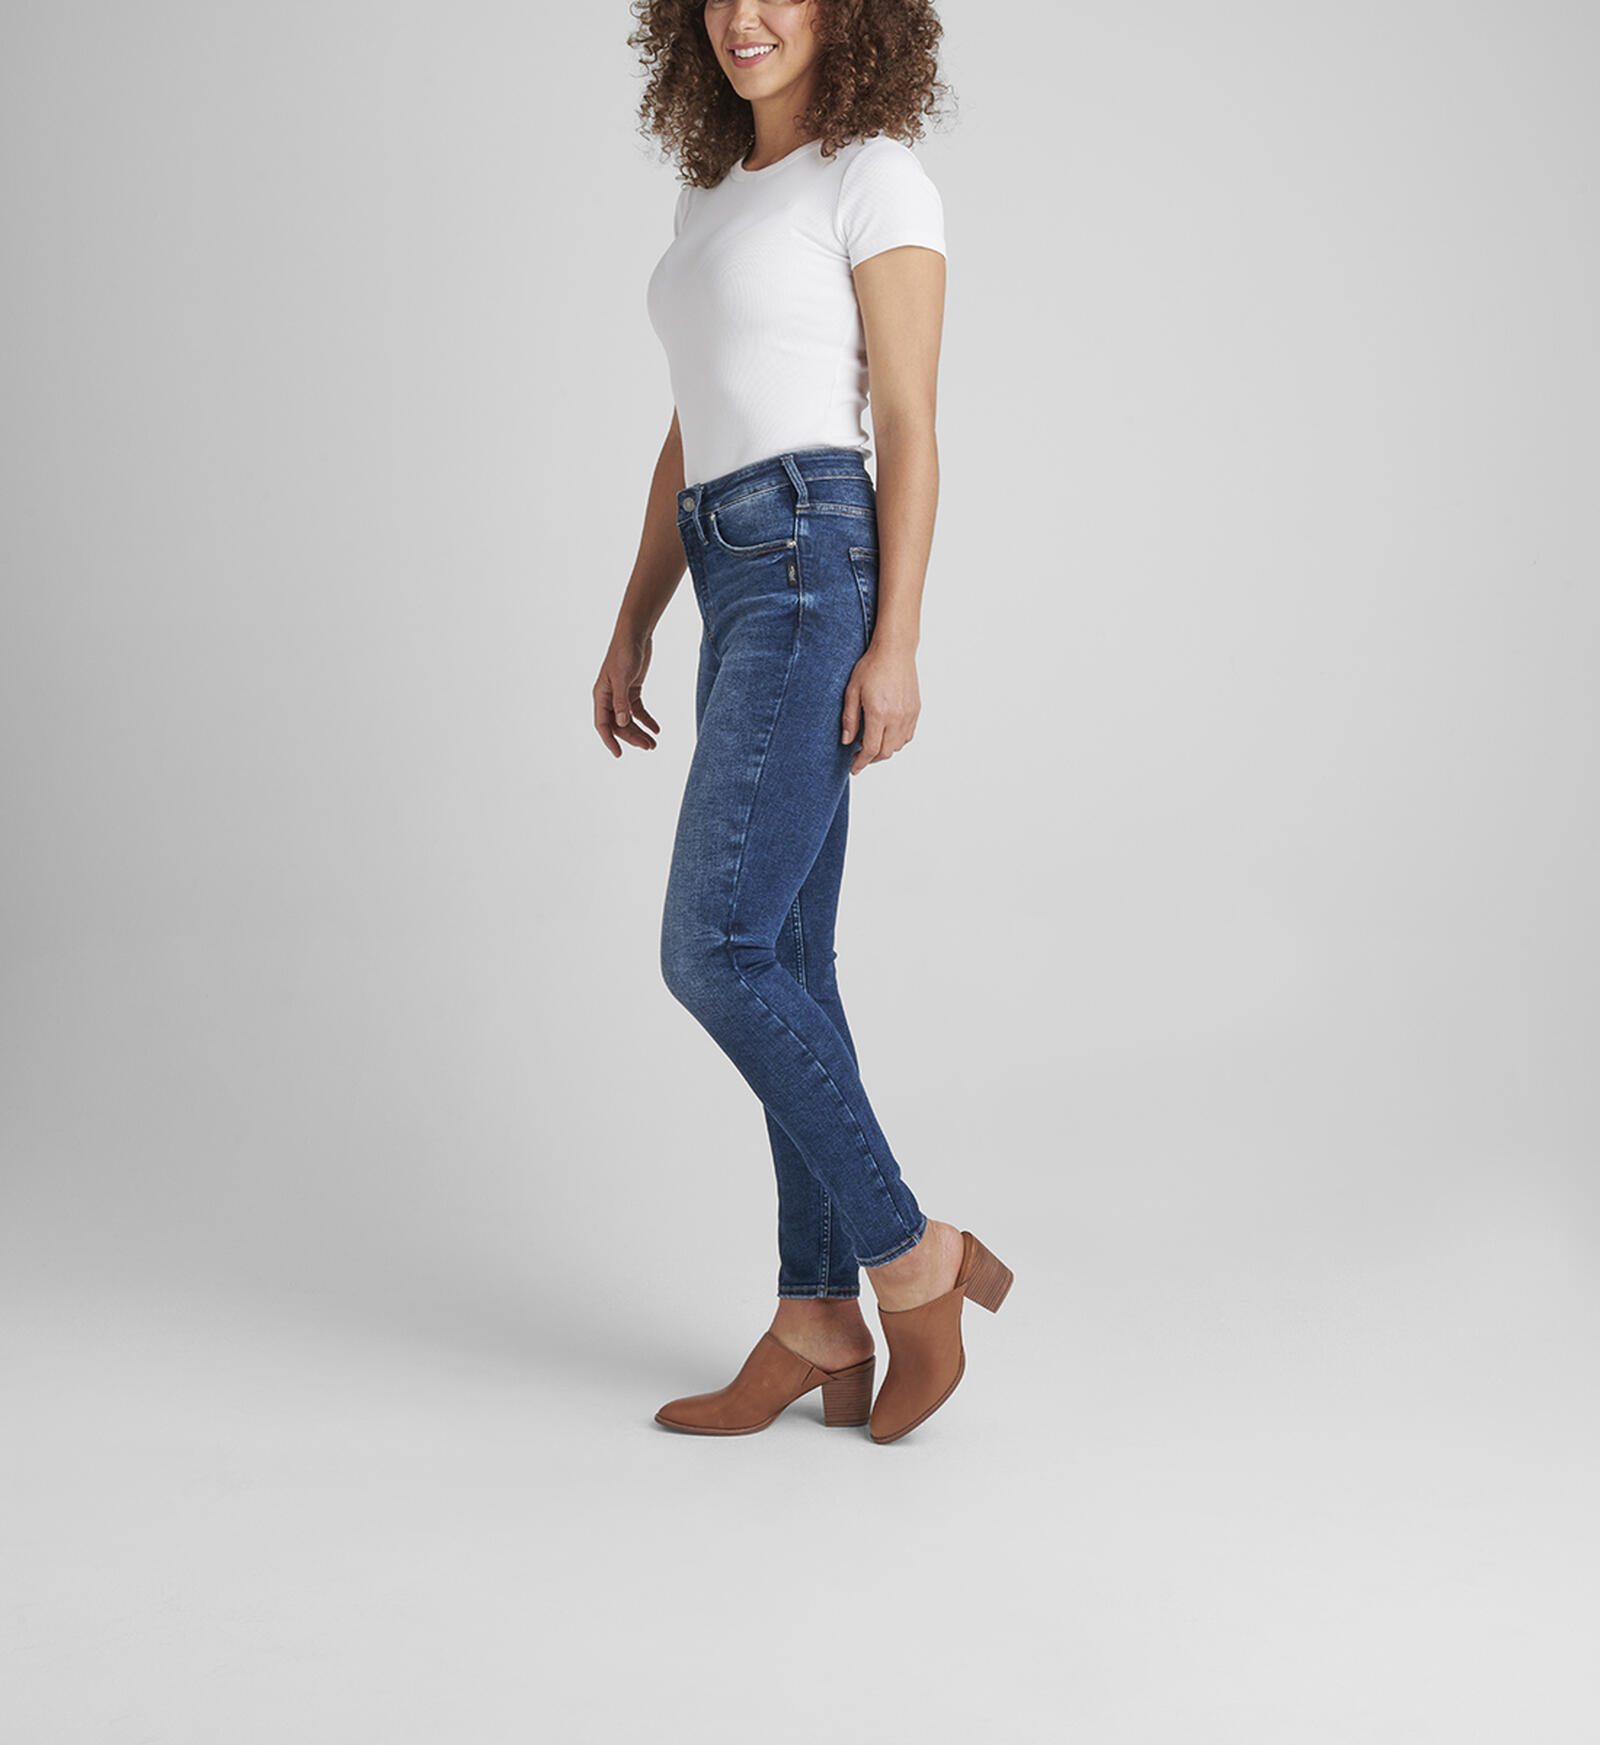 Buy Infinite High Rise Jeans USD 68.00 | Silver Jeans US